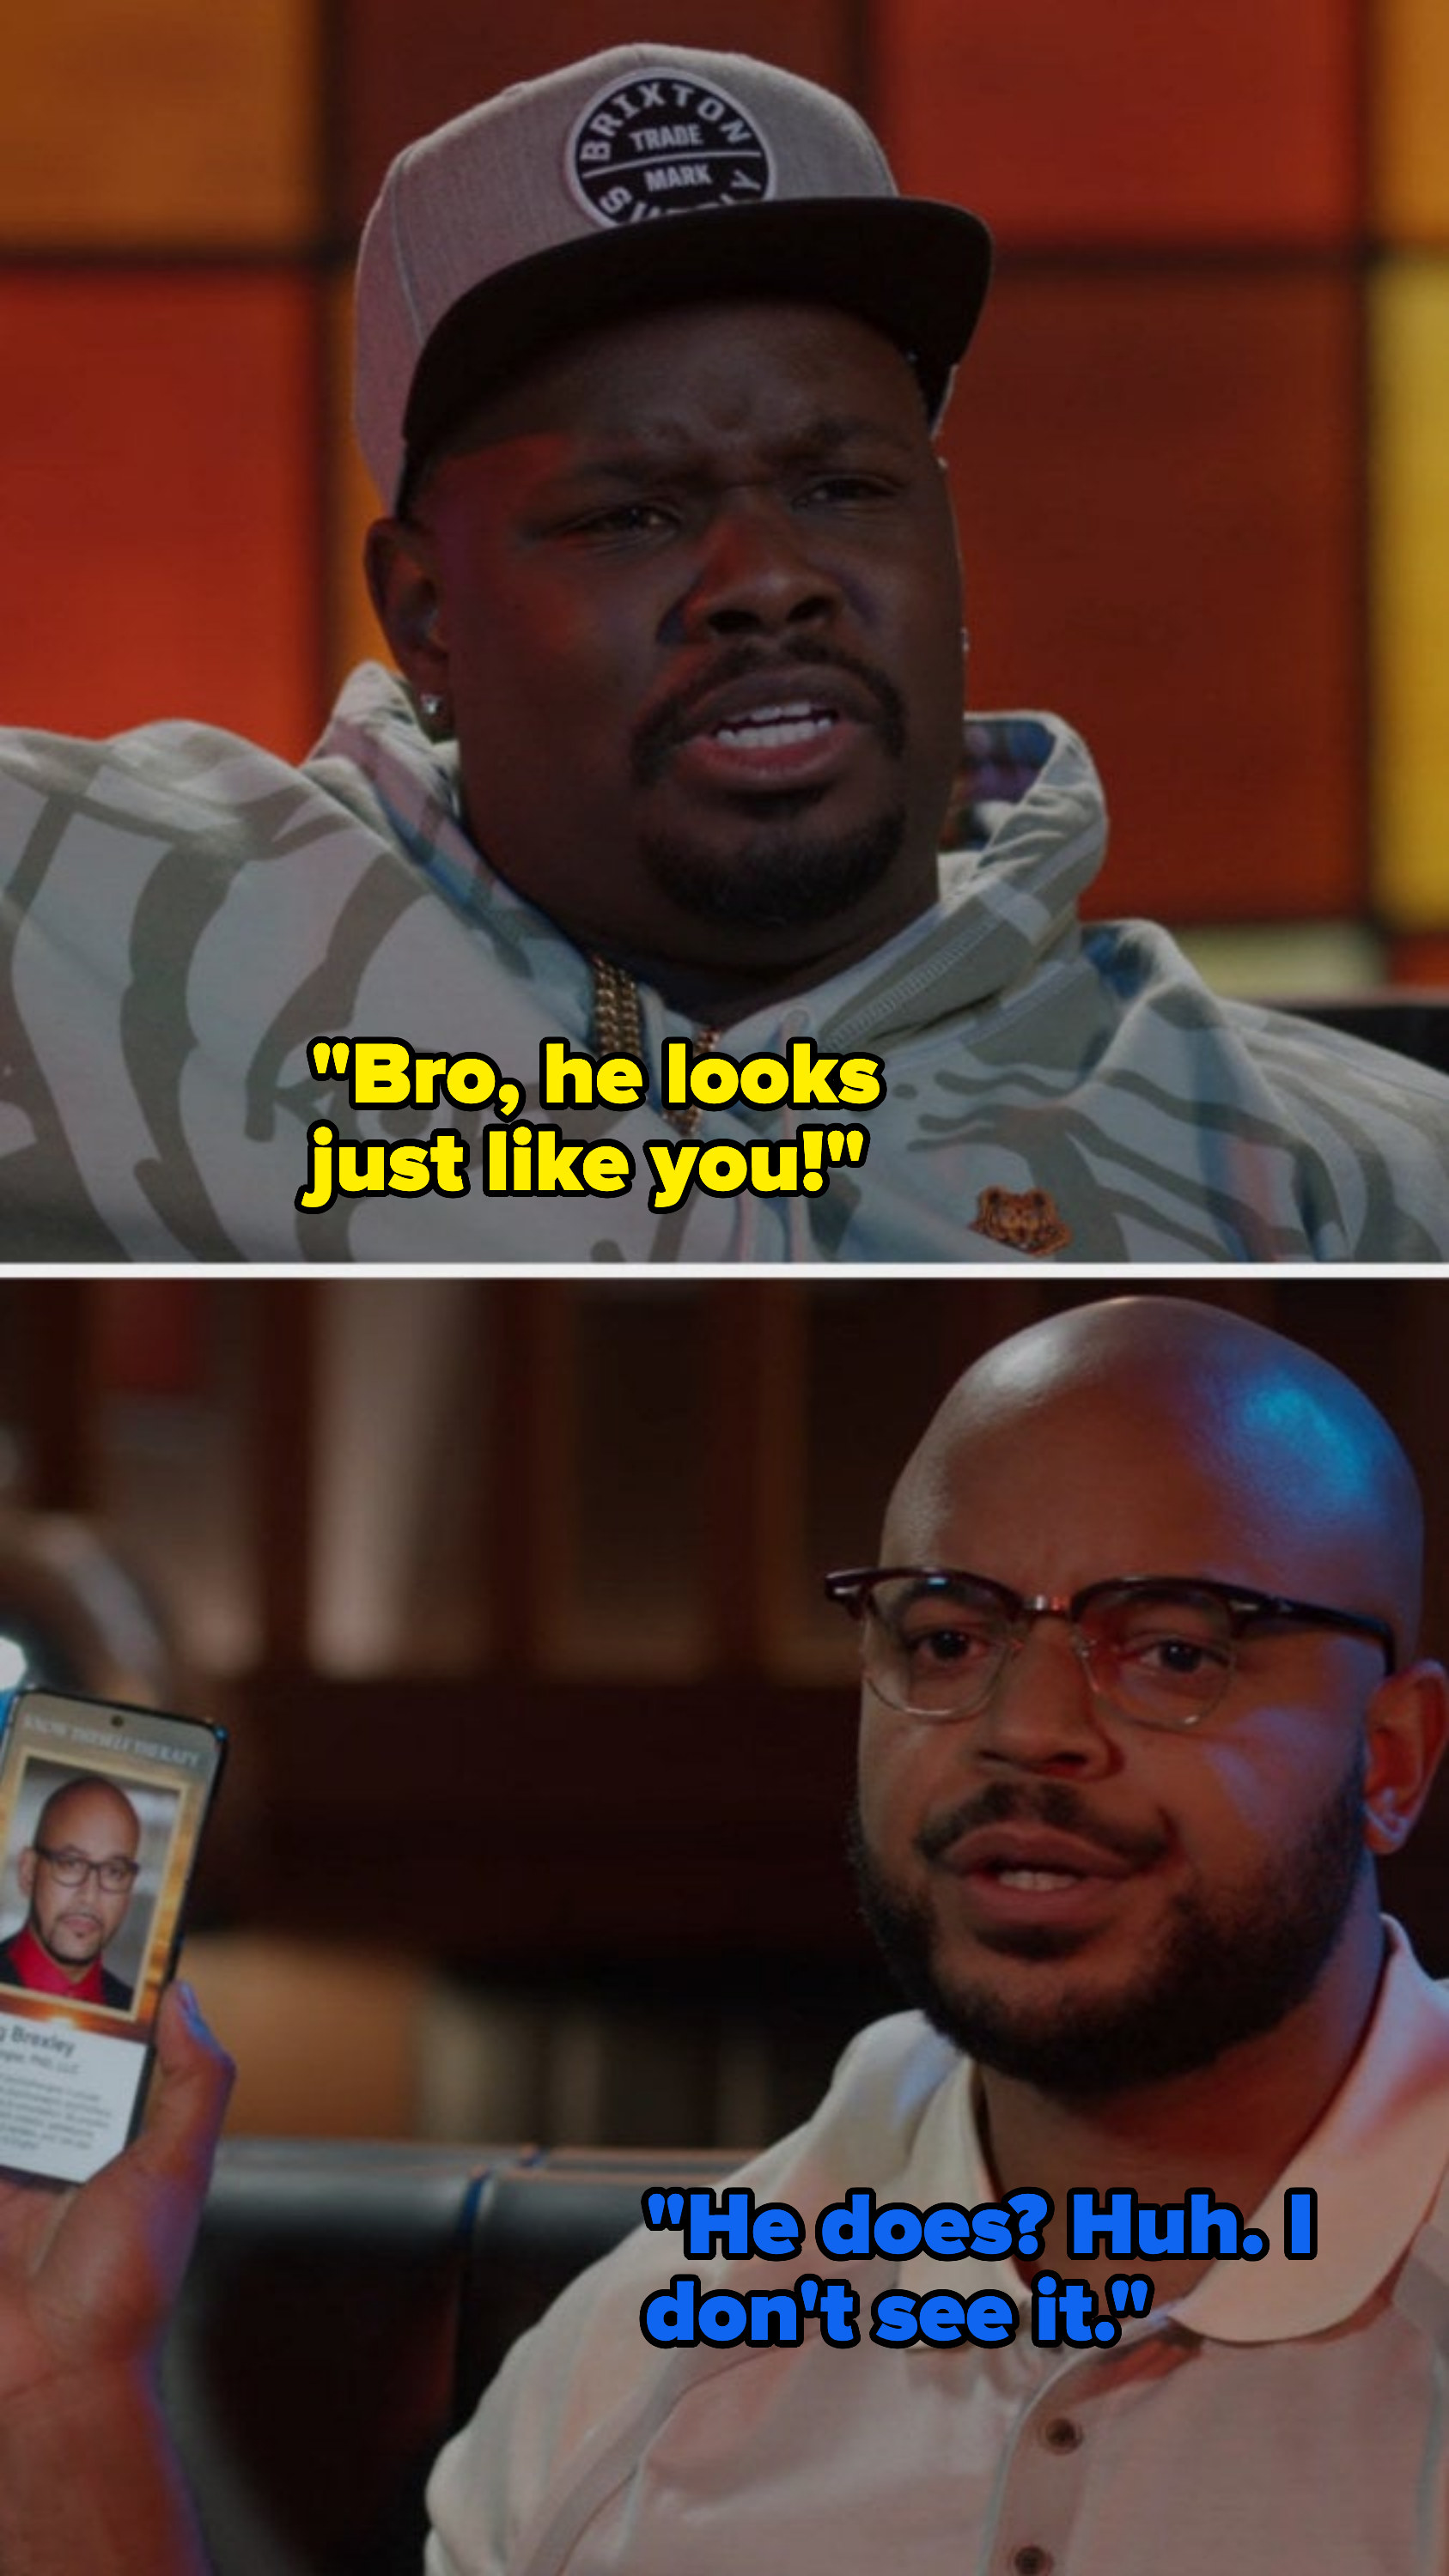 Wyatt shows a picture of his lookalike therapist